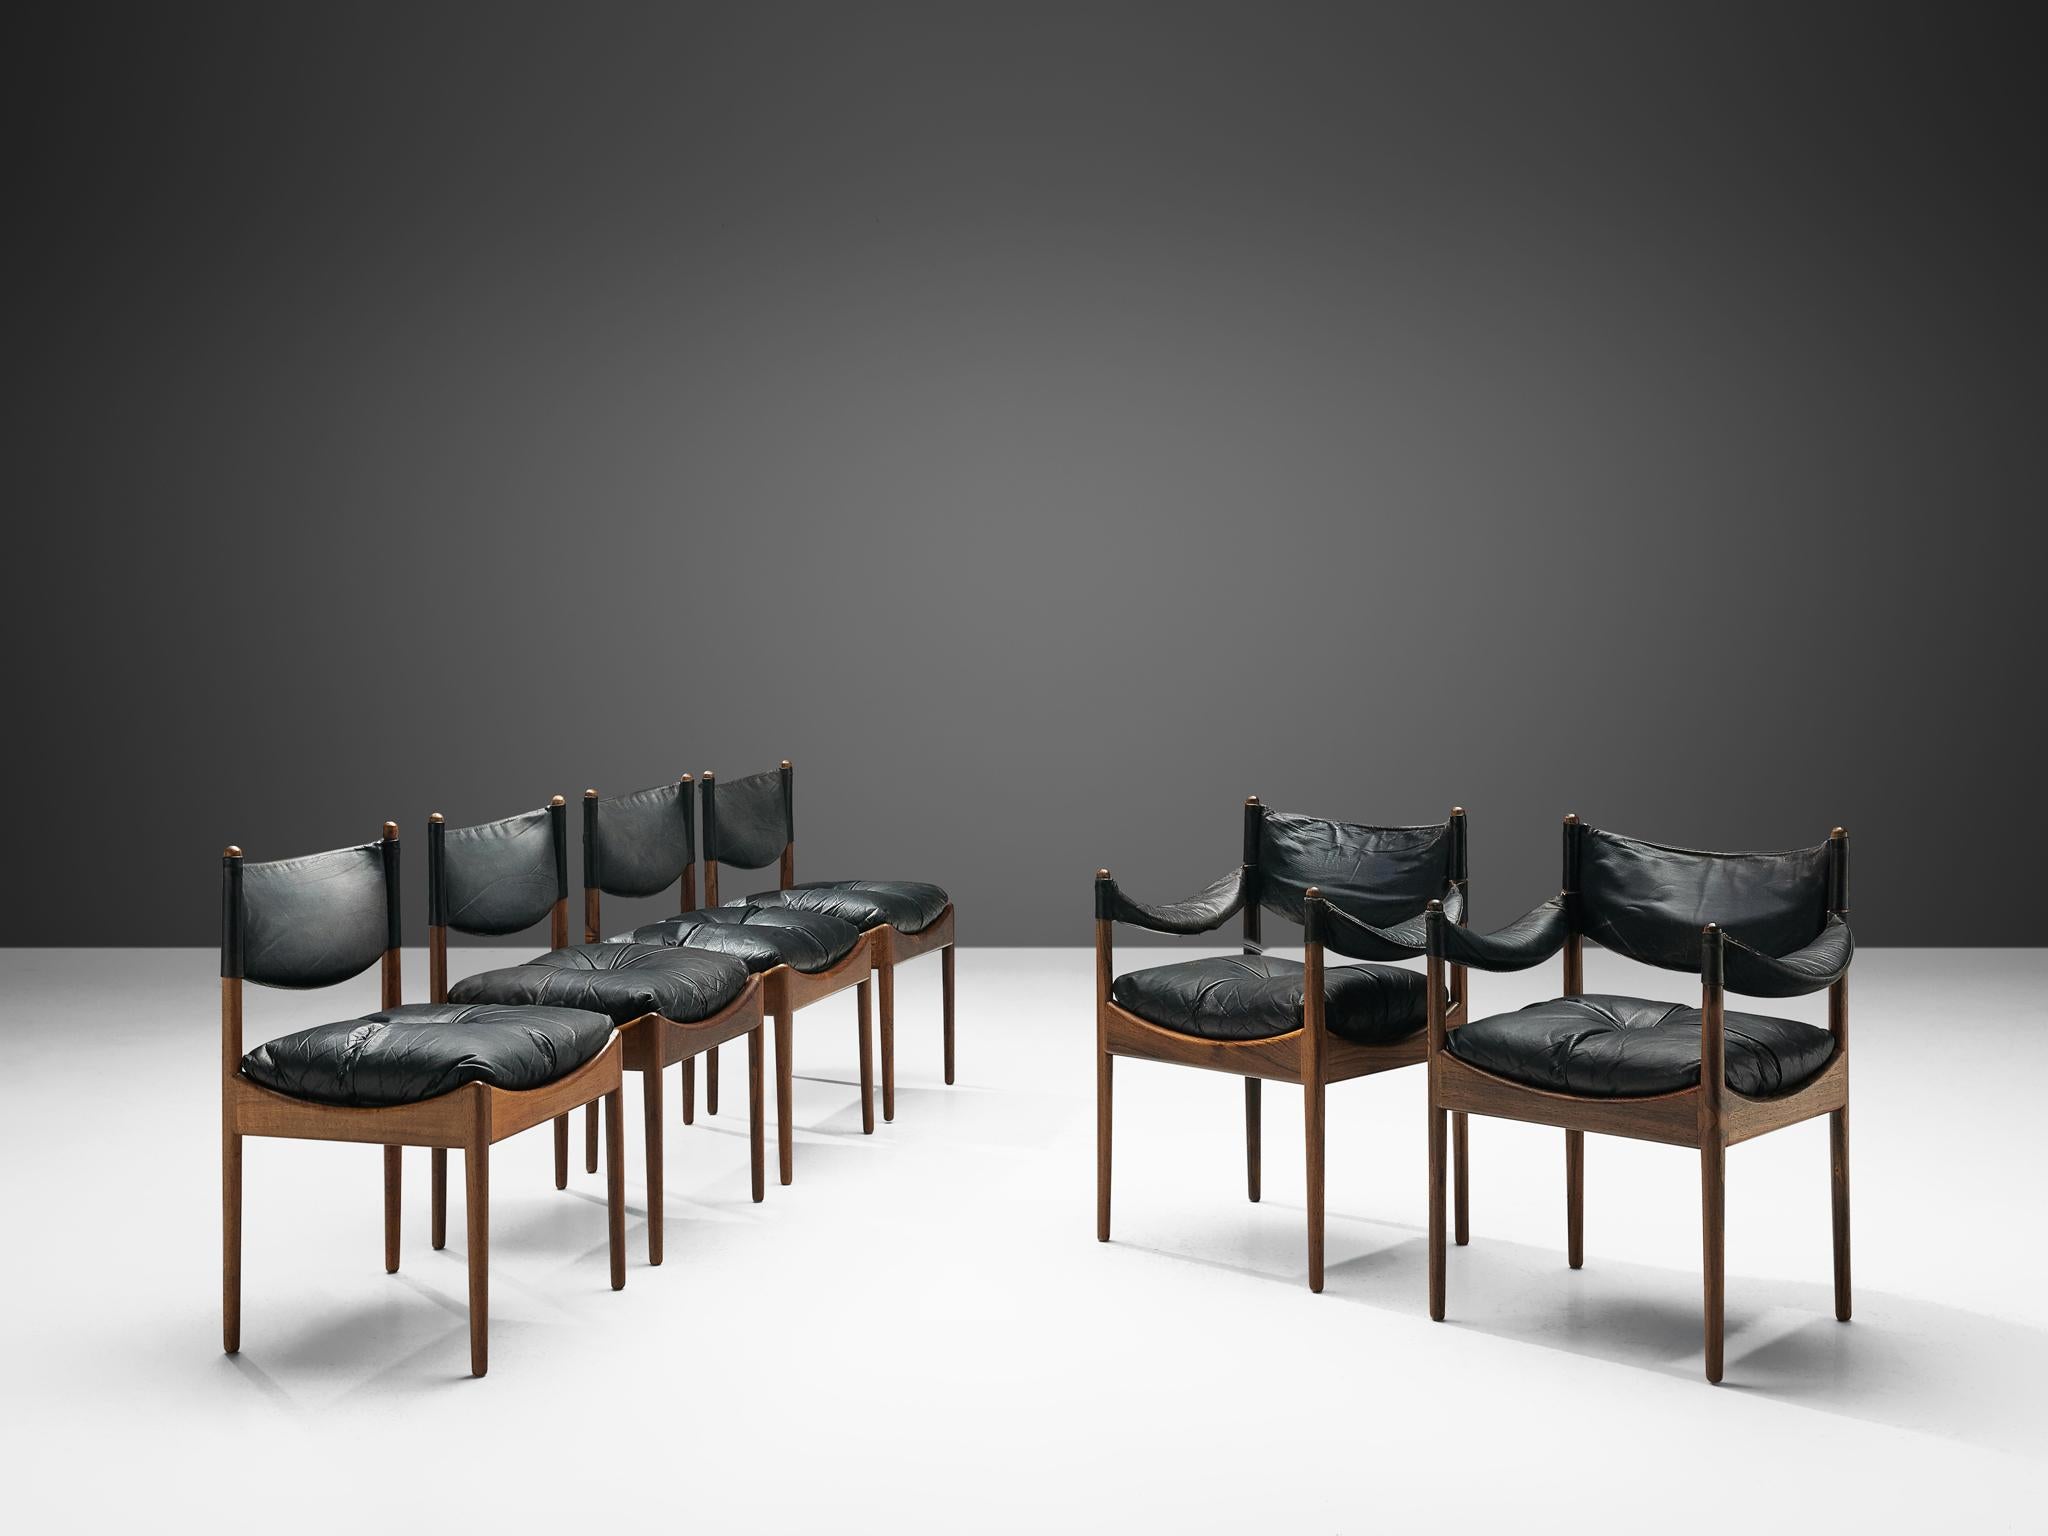 Kristian Solmer Vedel for Søren Willadsen, set of six dining chairs 'Modus', rosewood and black leather. Design 'Modus', Denmark, 1960s.

This set of chairs is designed by Danish designer Kristian Vedel in the 1960s. The chairs feature a rosewood